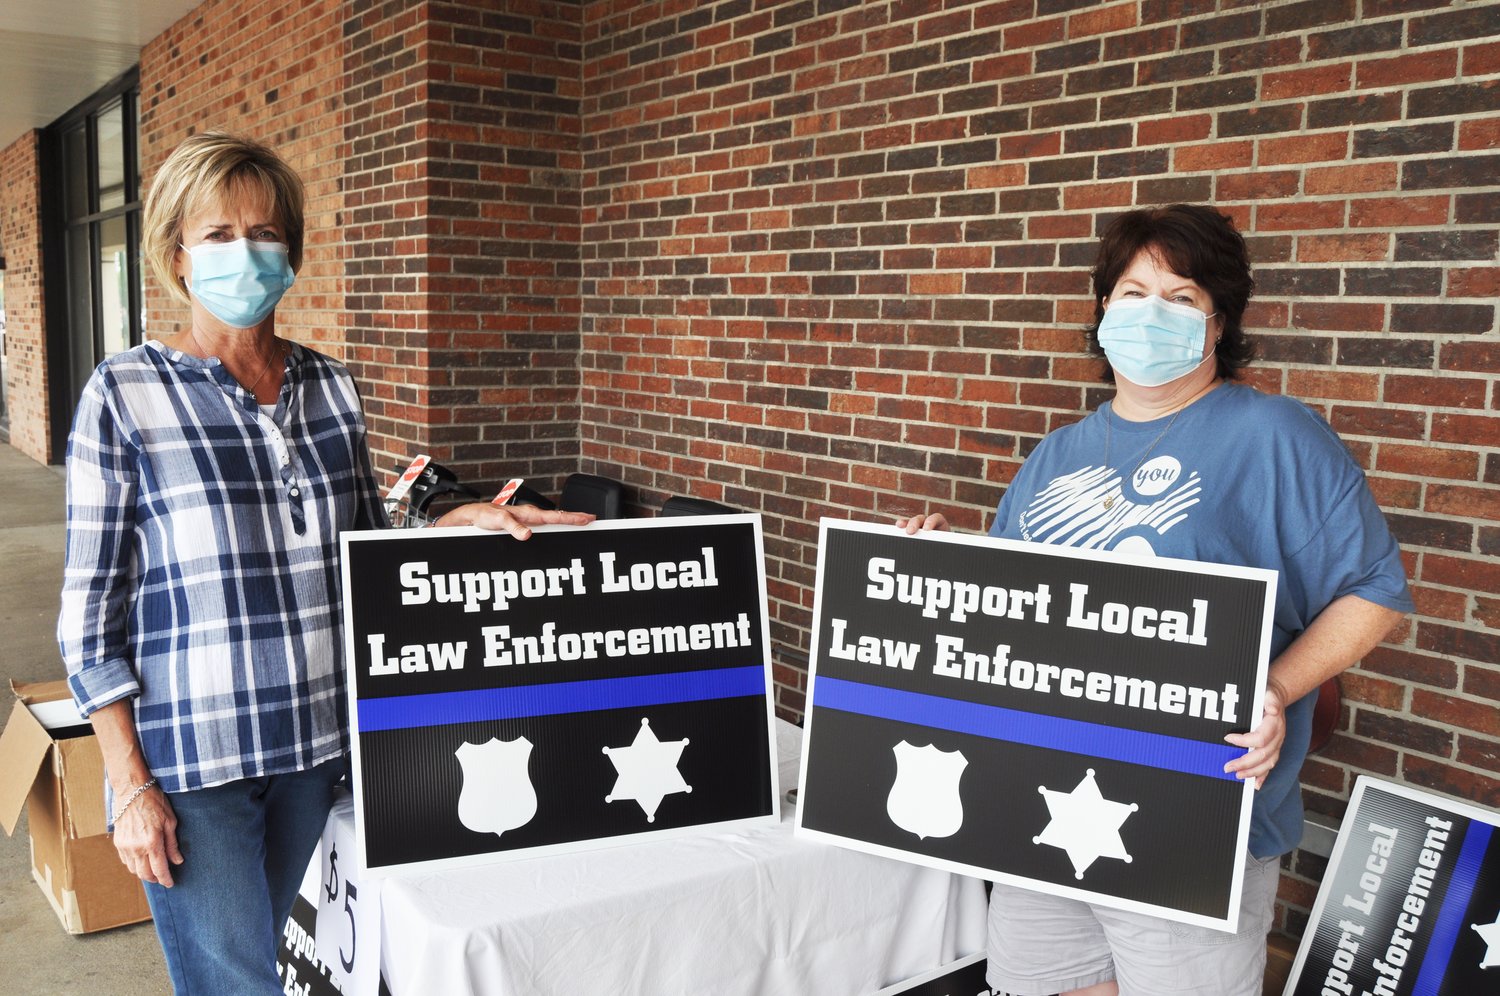 Bonnie Mills, left, and Mindy Byers hold signs they were selling supporting local police officers Saturday at Kroger. The project has received support from surrounding counties.